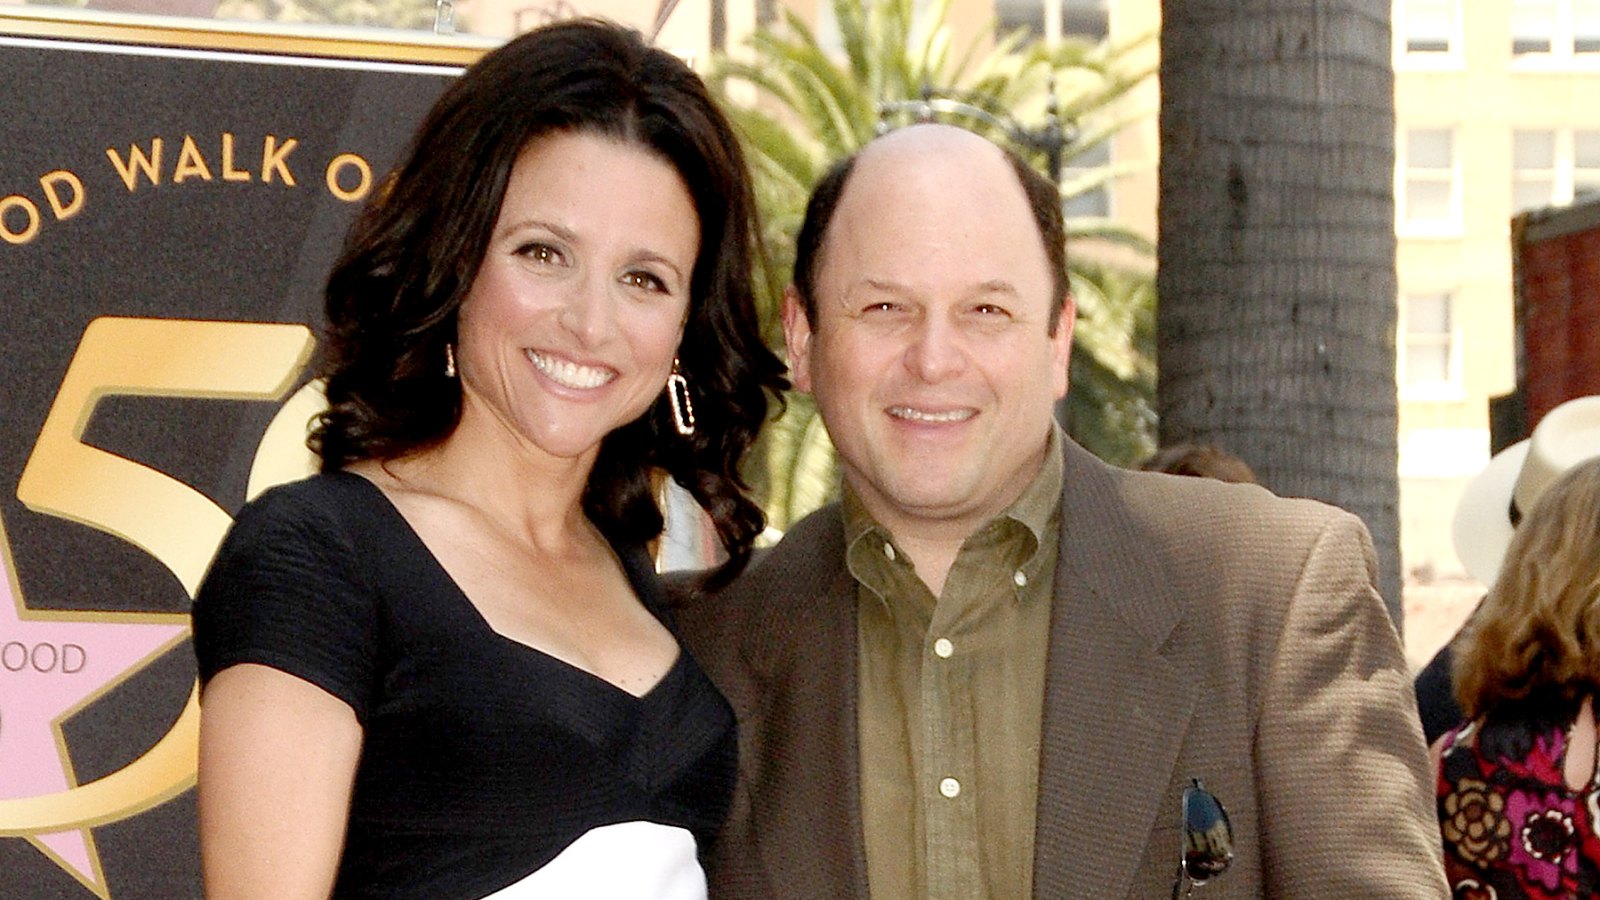 Julia Louis-Dreyfus and Jason Alexander attend Julia Louis-Dreyfus' induction into the Hollywood Walk of Fame on May 4, 2010 in Hollywood, California.